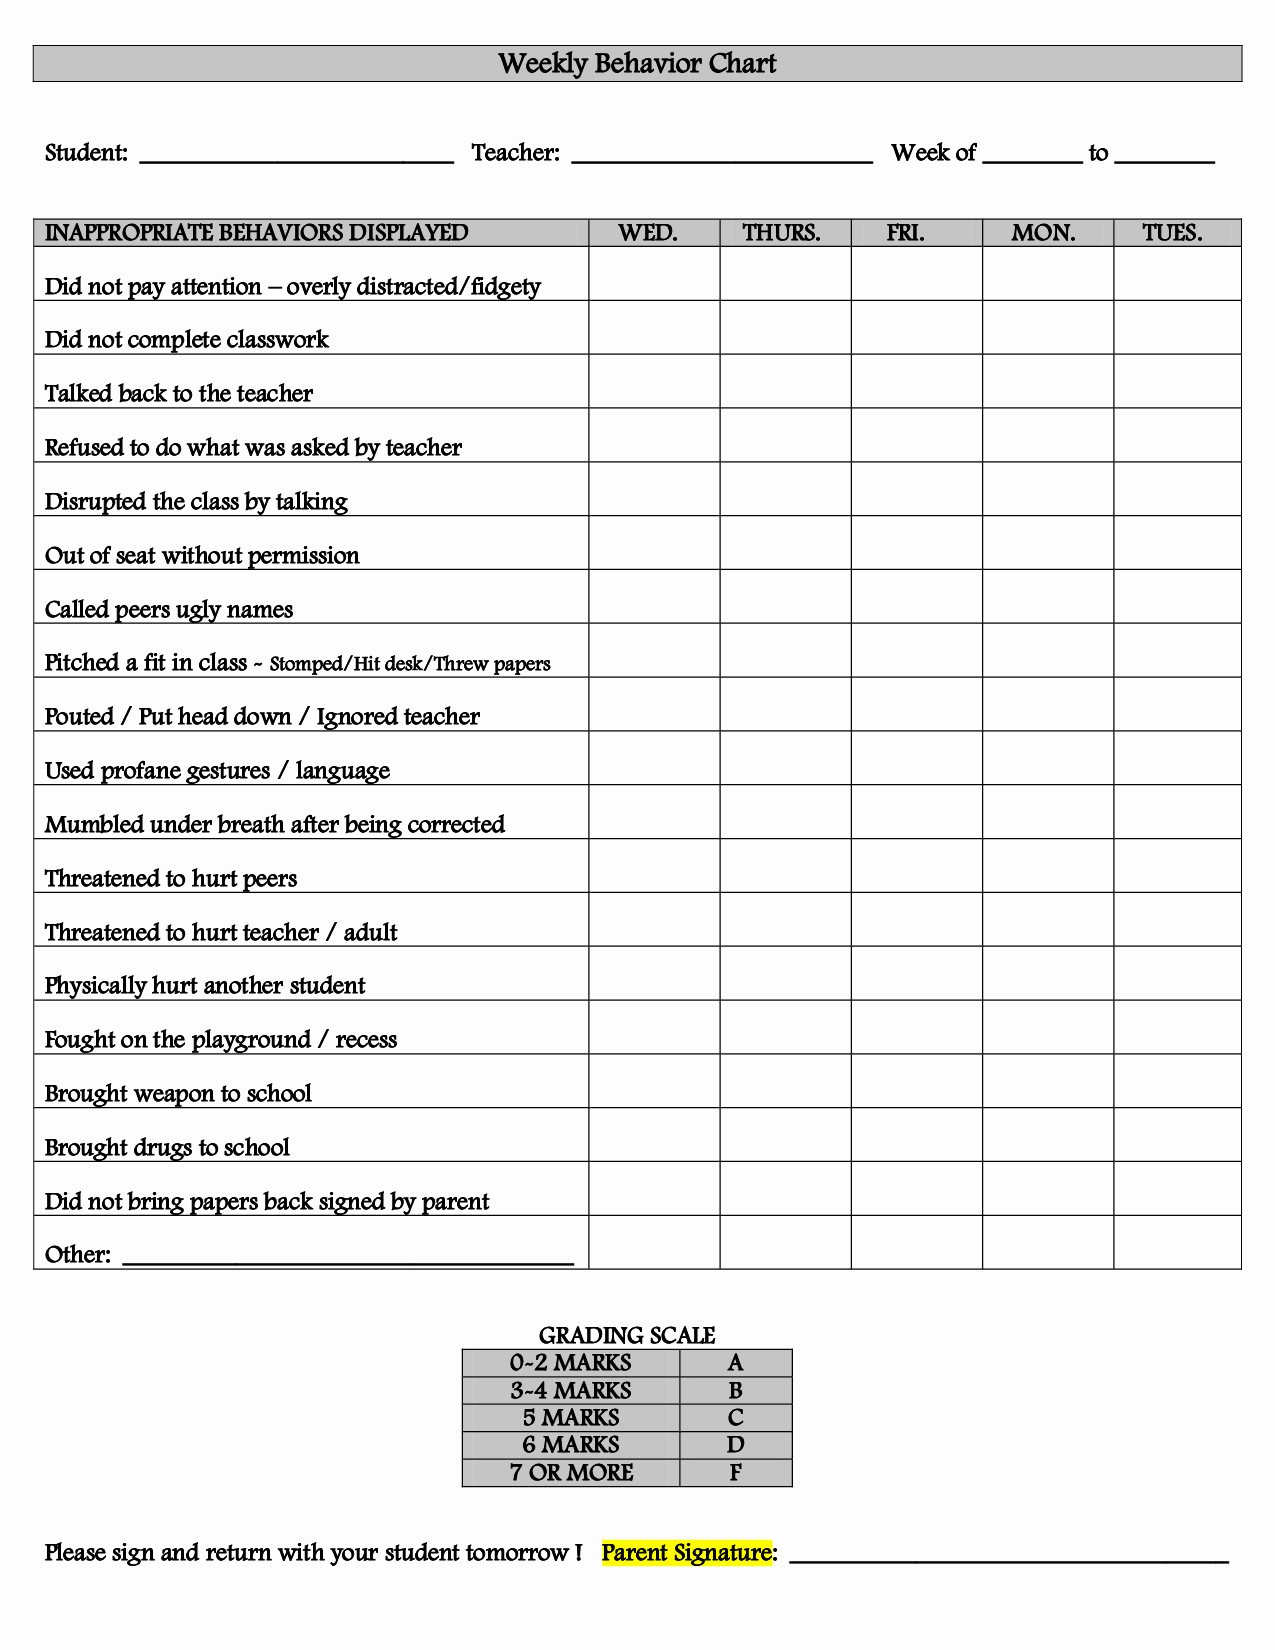 Daily Behavior Chart Template New Weekly Behavior Chart Template Learning Line